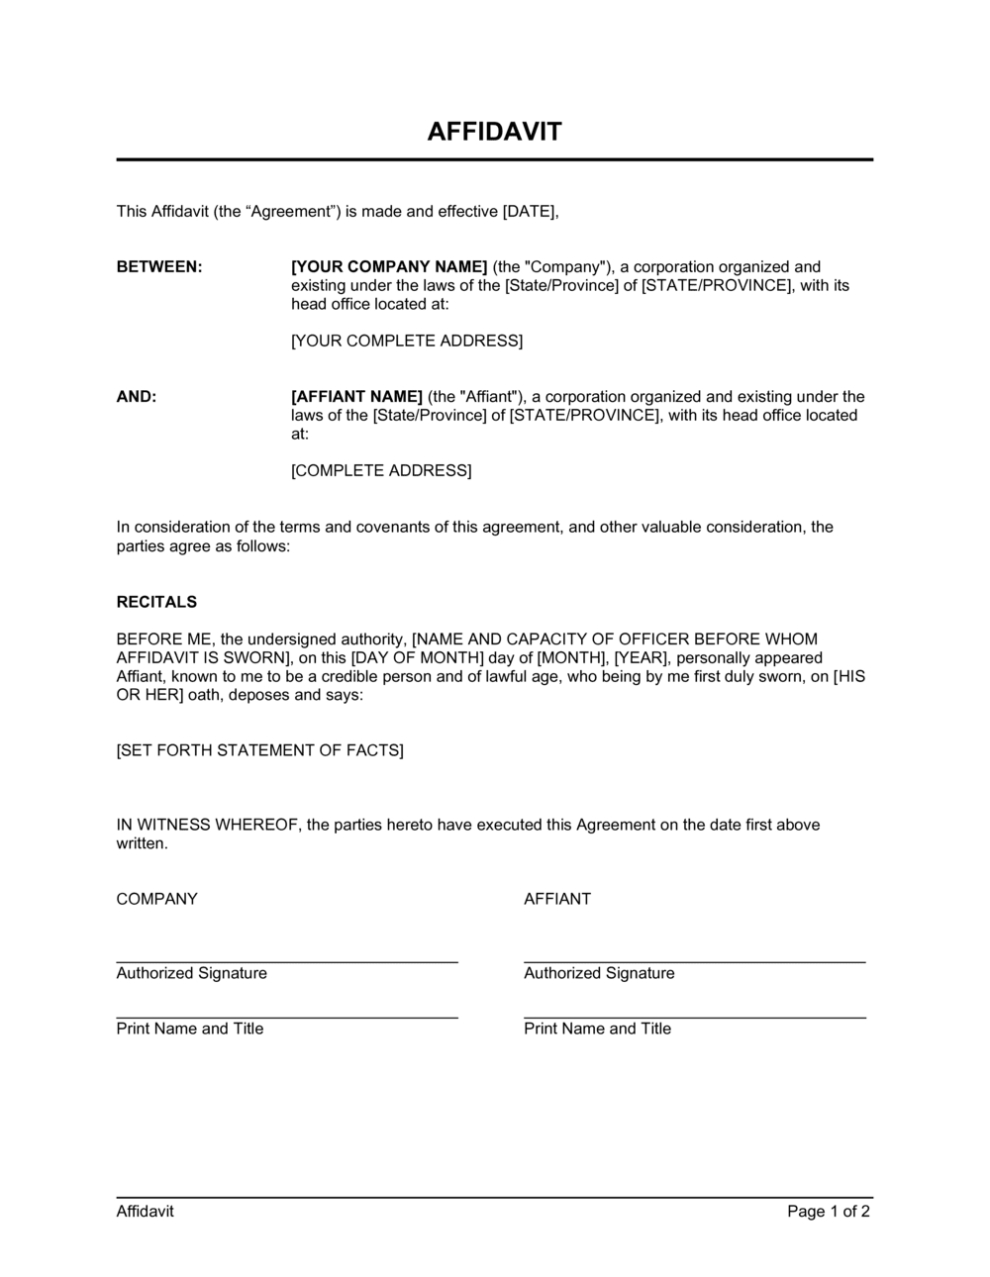 Affidavit Template | By Business In A Box™ With Regard To Business In A Box Templates